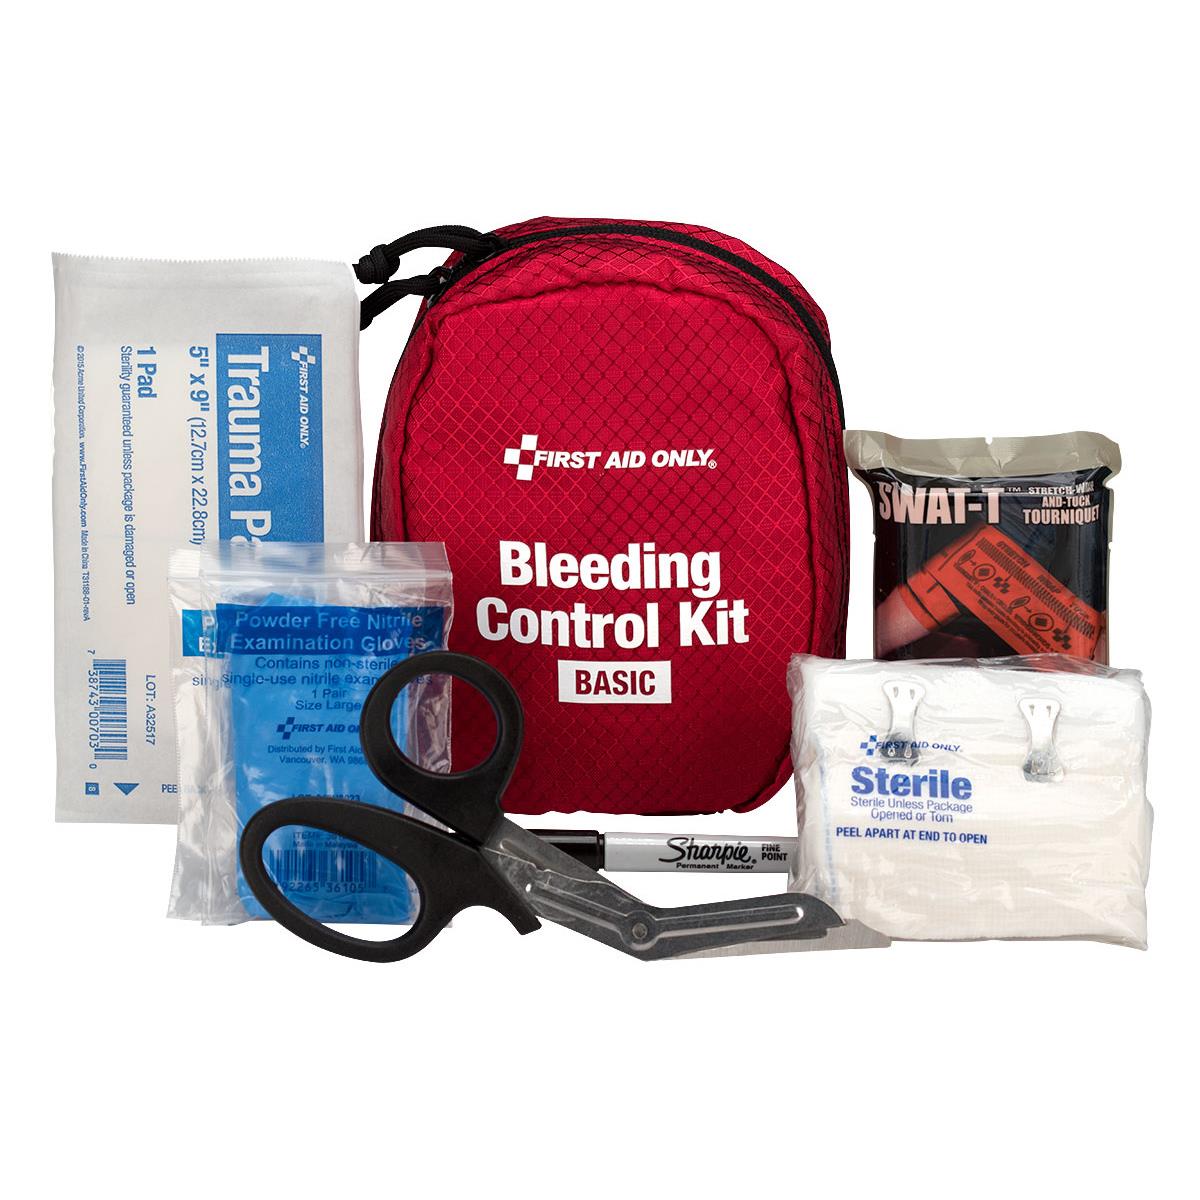 First Aid Only® Bleeding Control Kit, Basic